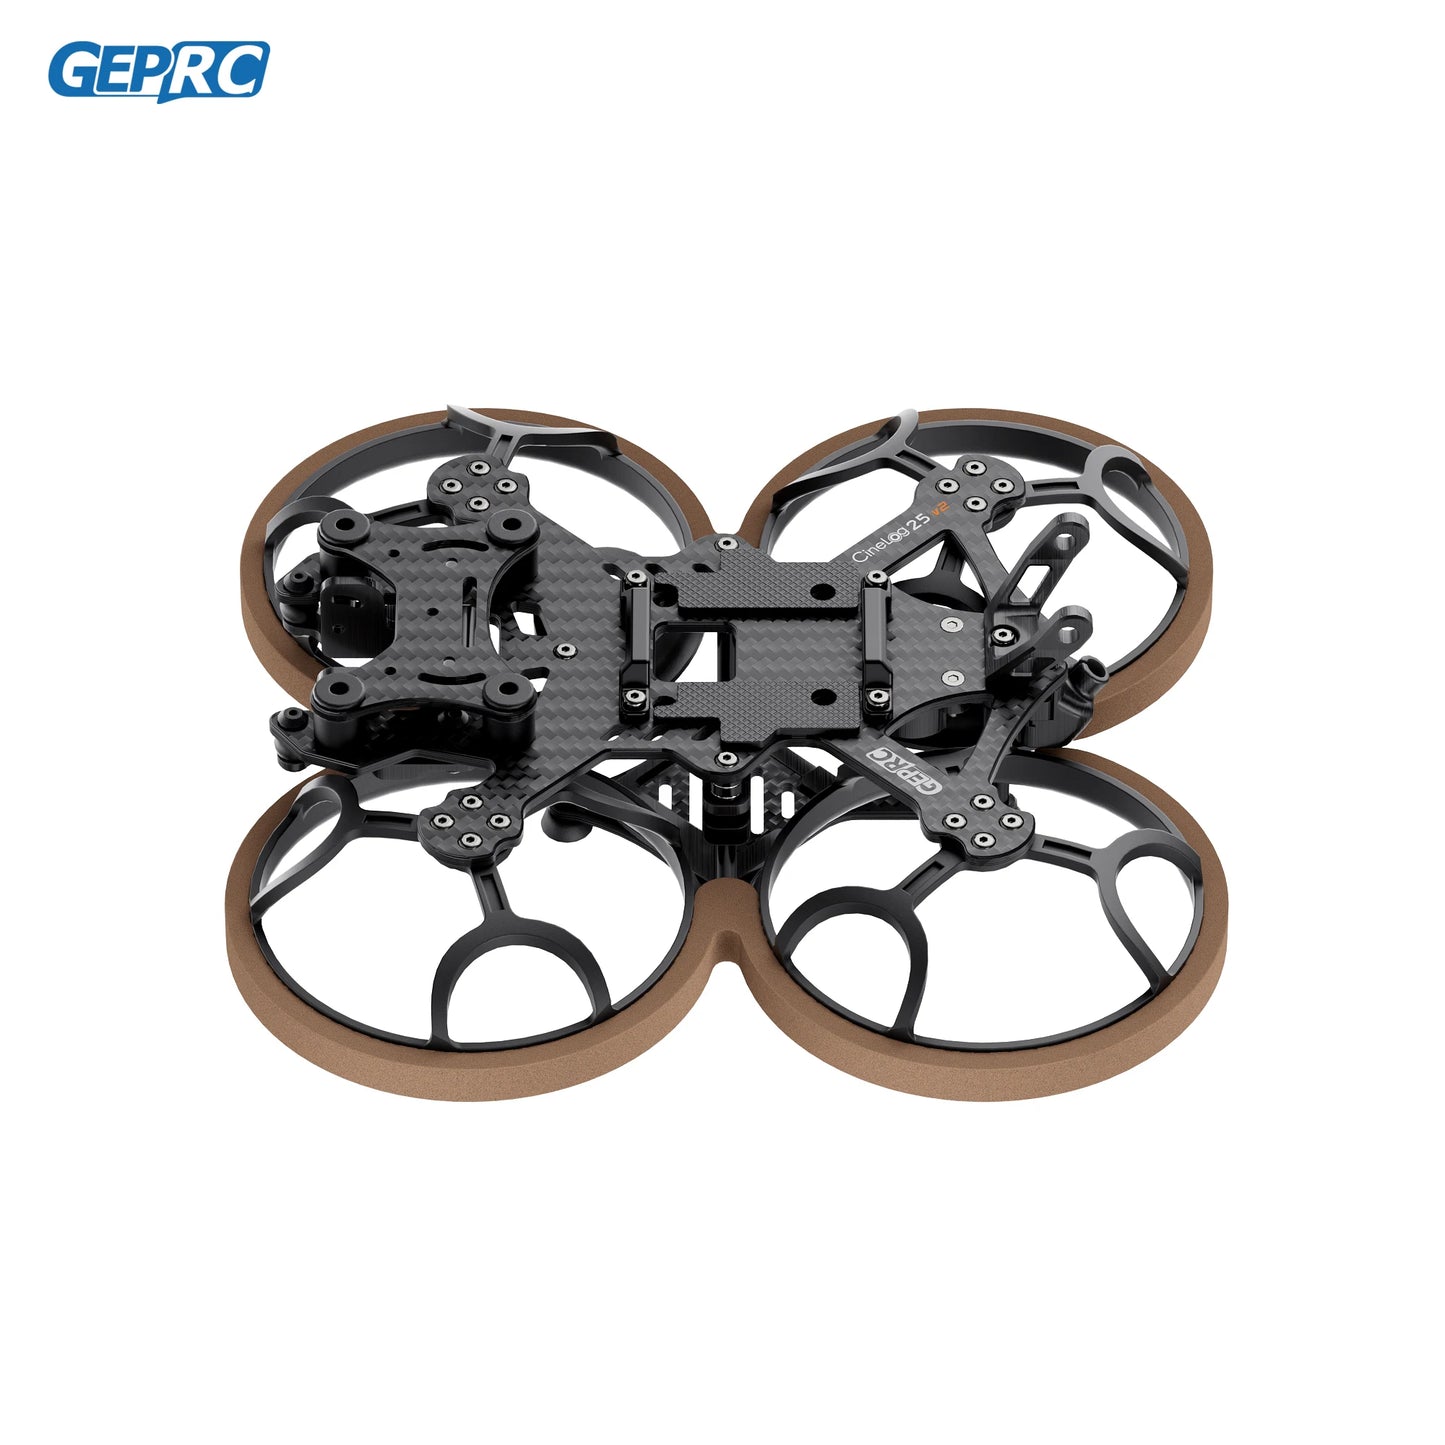 GEPRC GEP-CL25 V2 Frame - 2.5 Inch Parts Propeller Accessory Base Quadcopter FPV Freestyle RC Racing Drone Cinelog25 V2